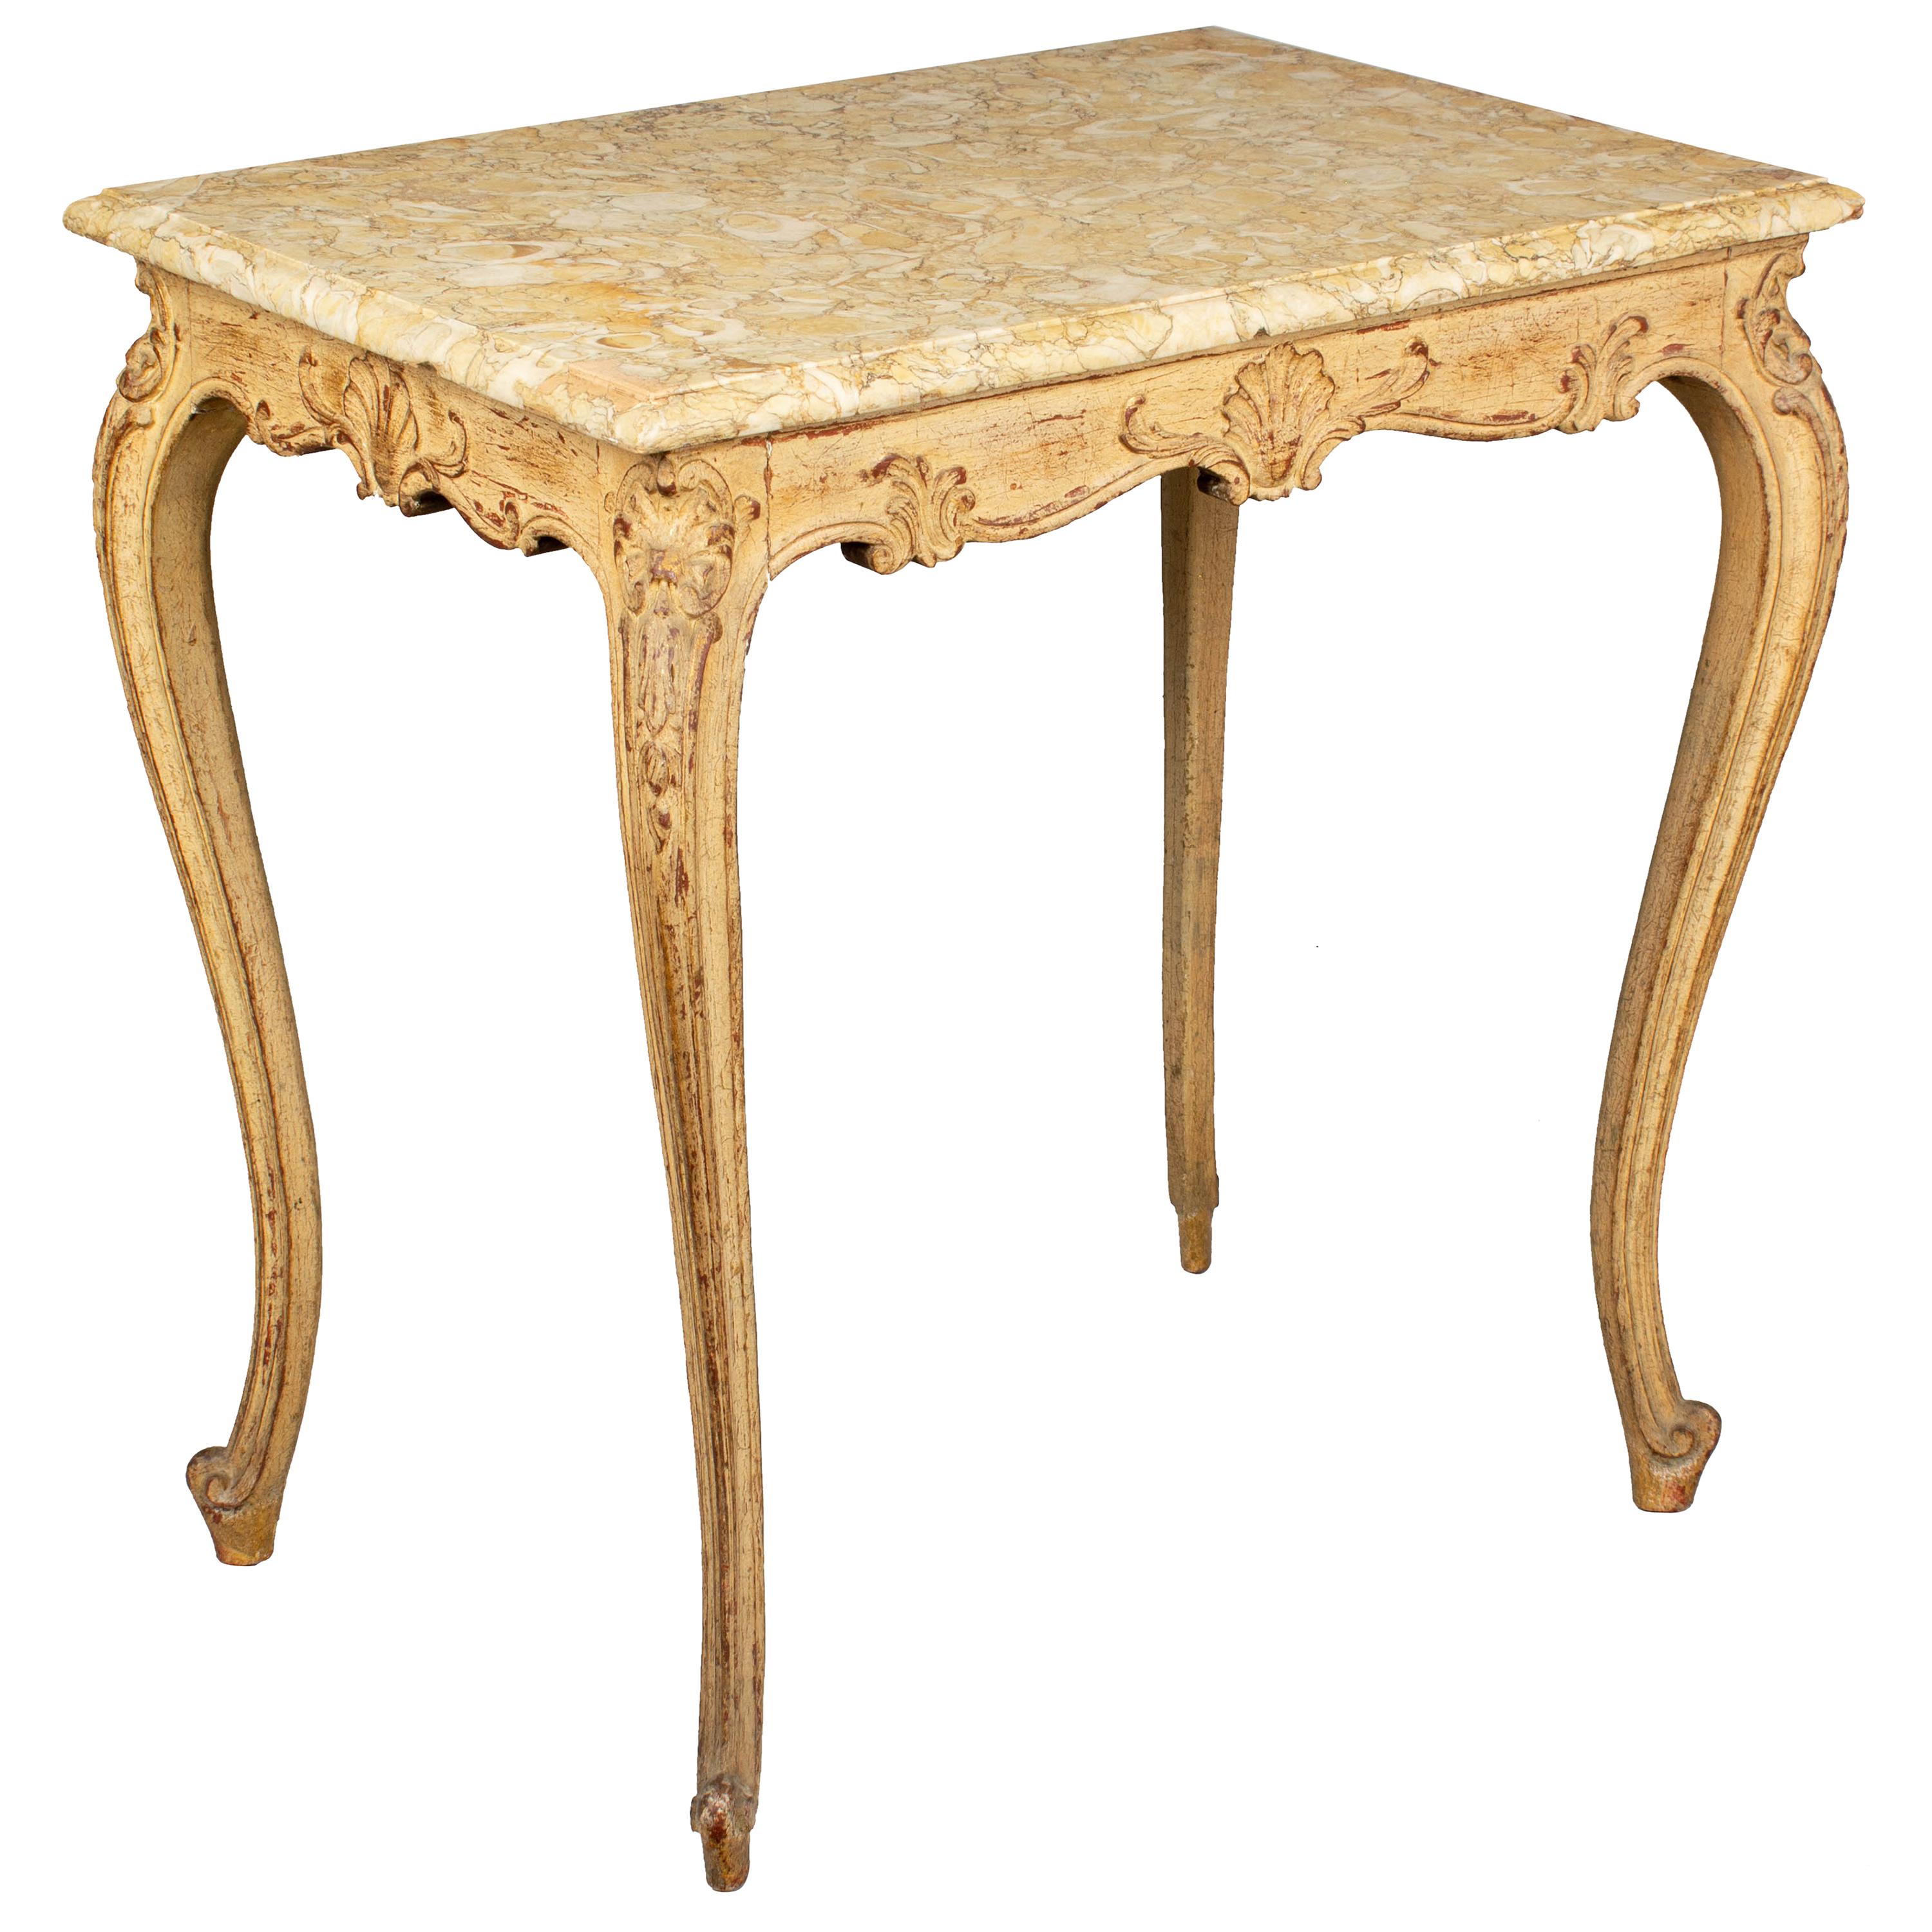 Early 20th c French Louis XV Style Marble-Top Table